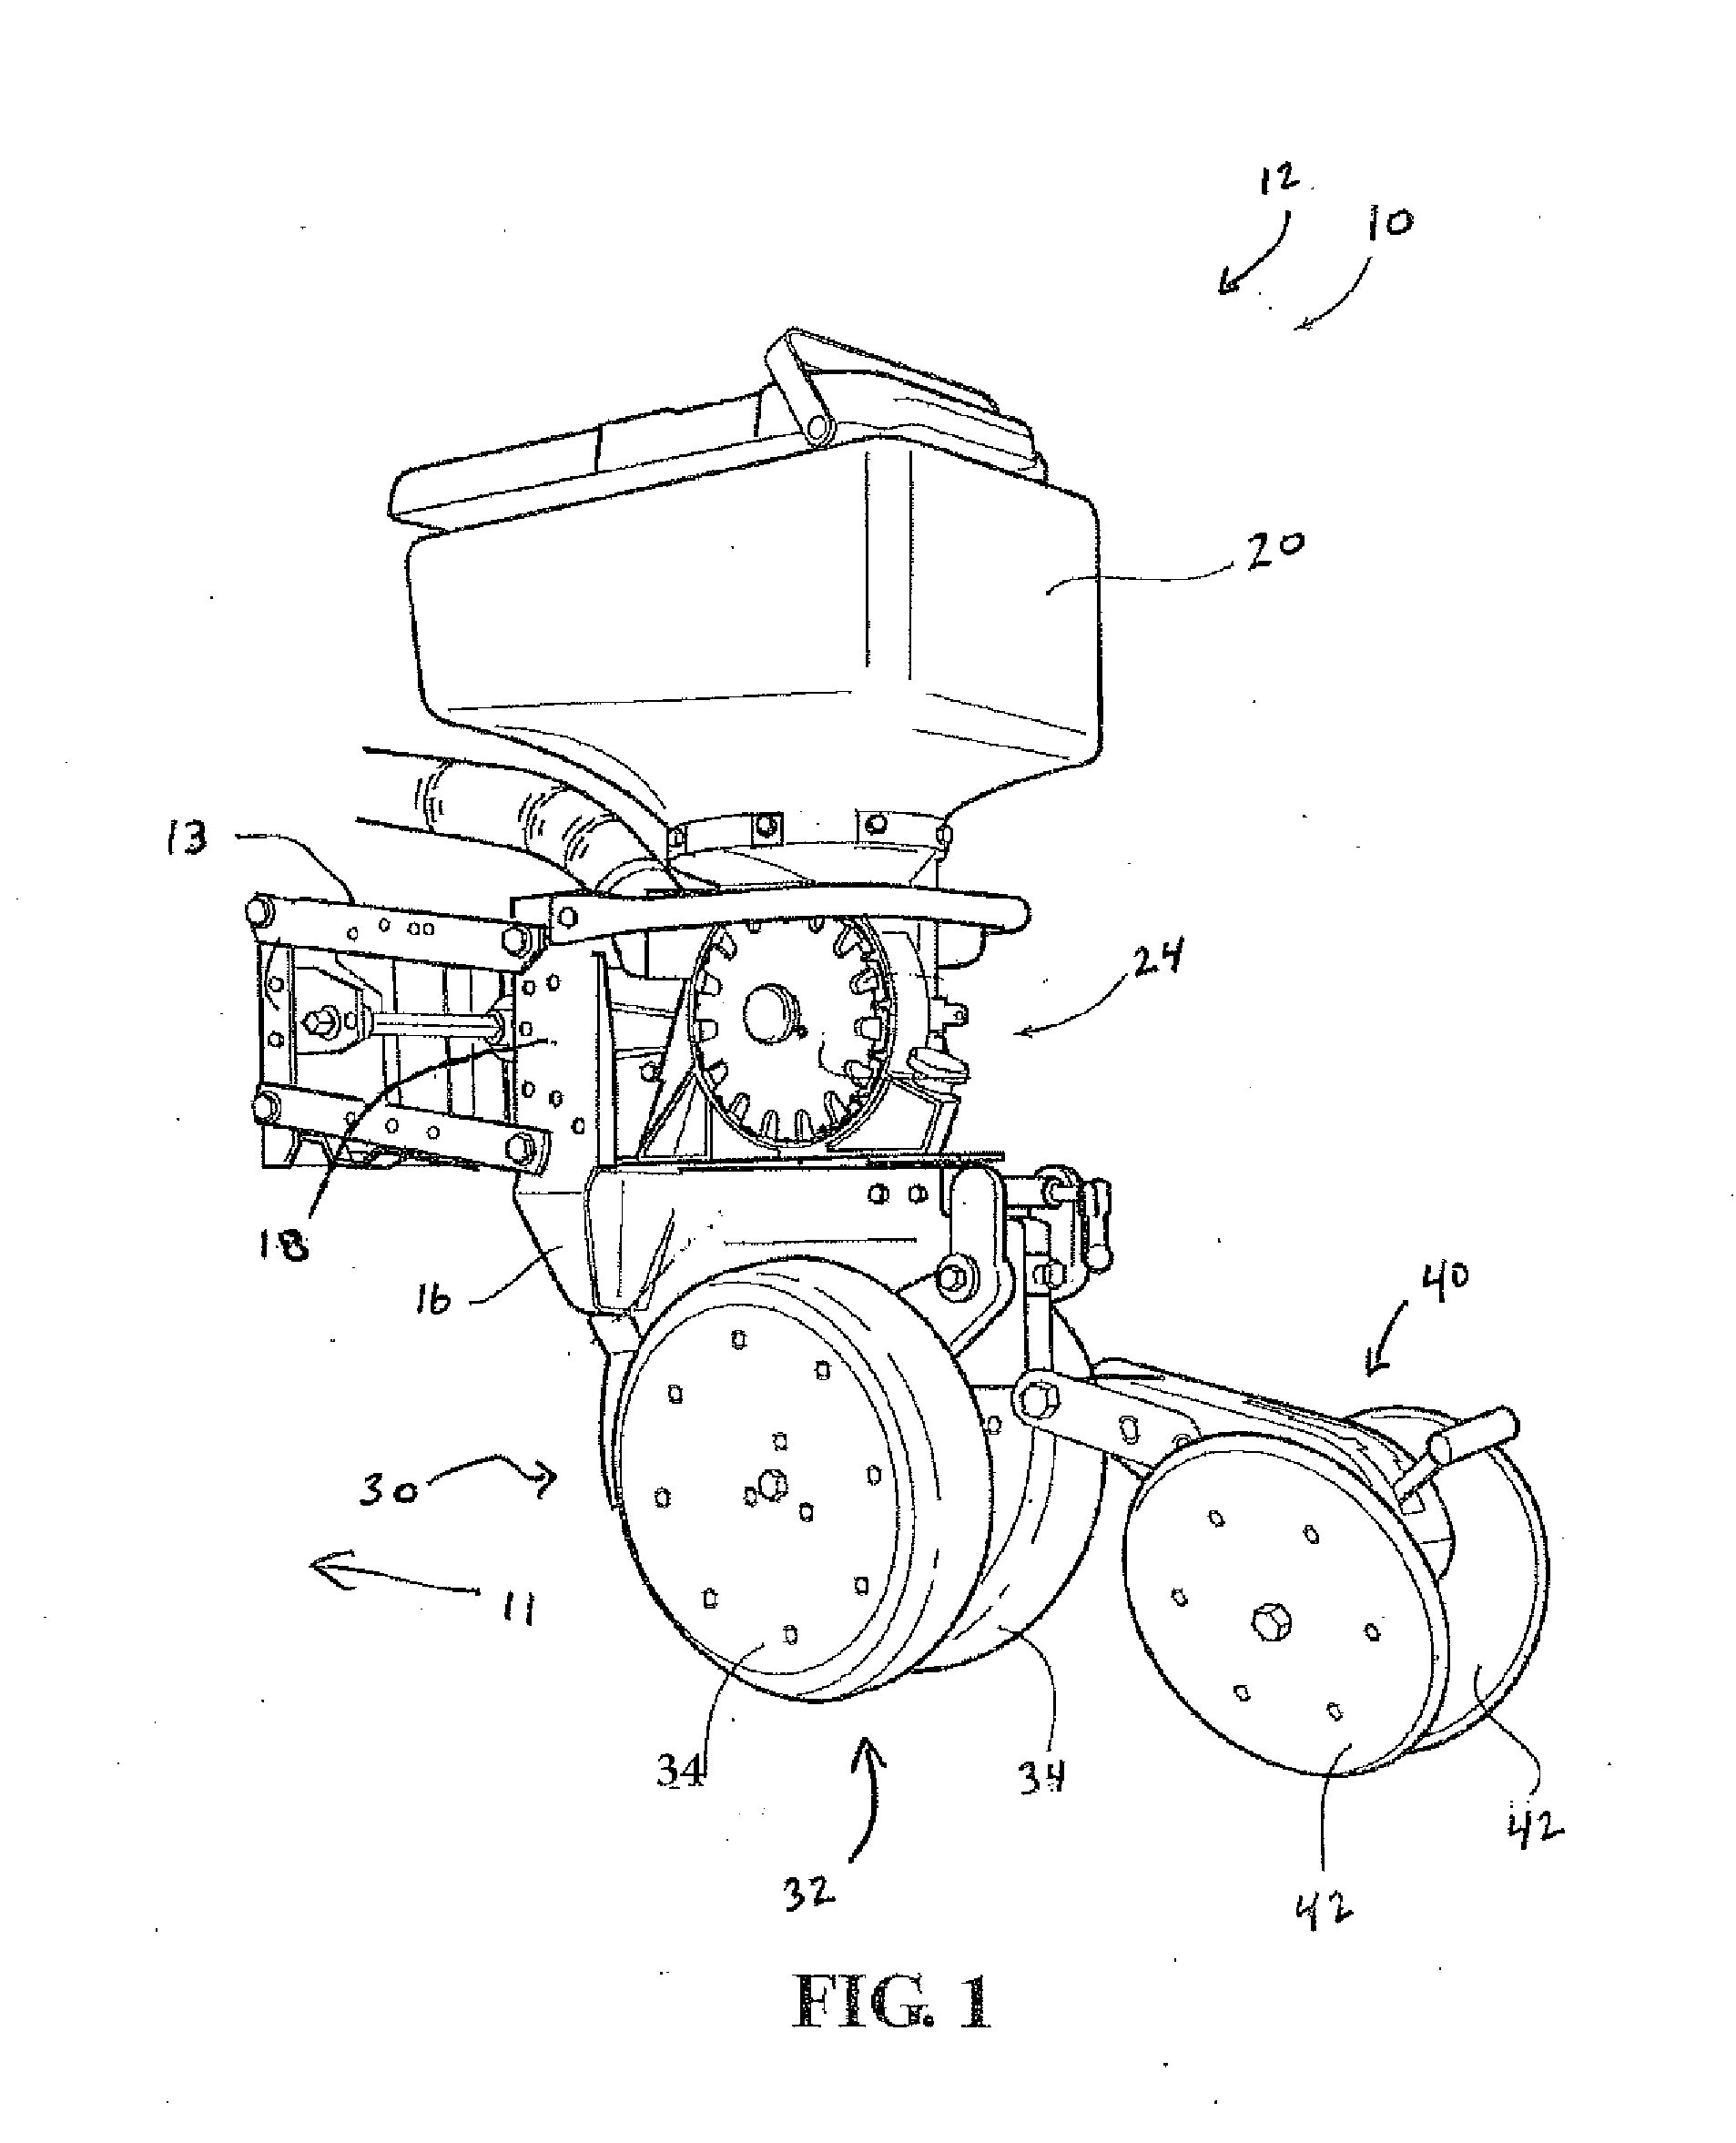 Dual belt seed delivery mechanism